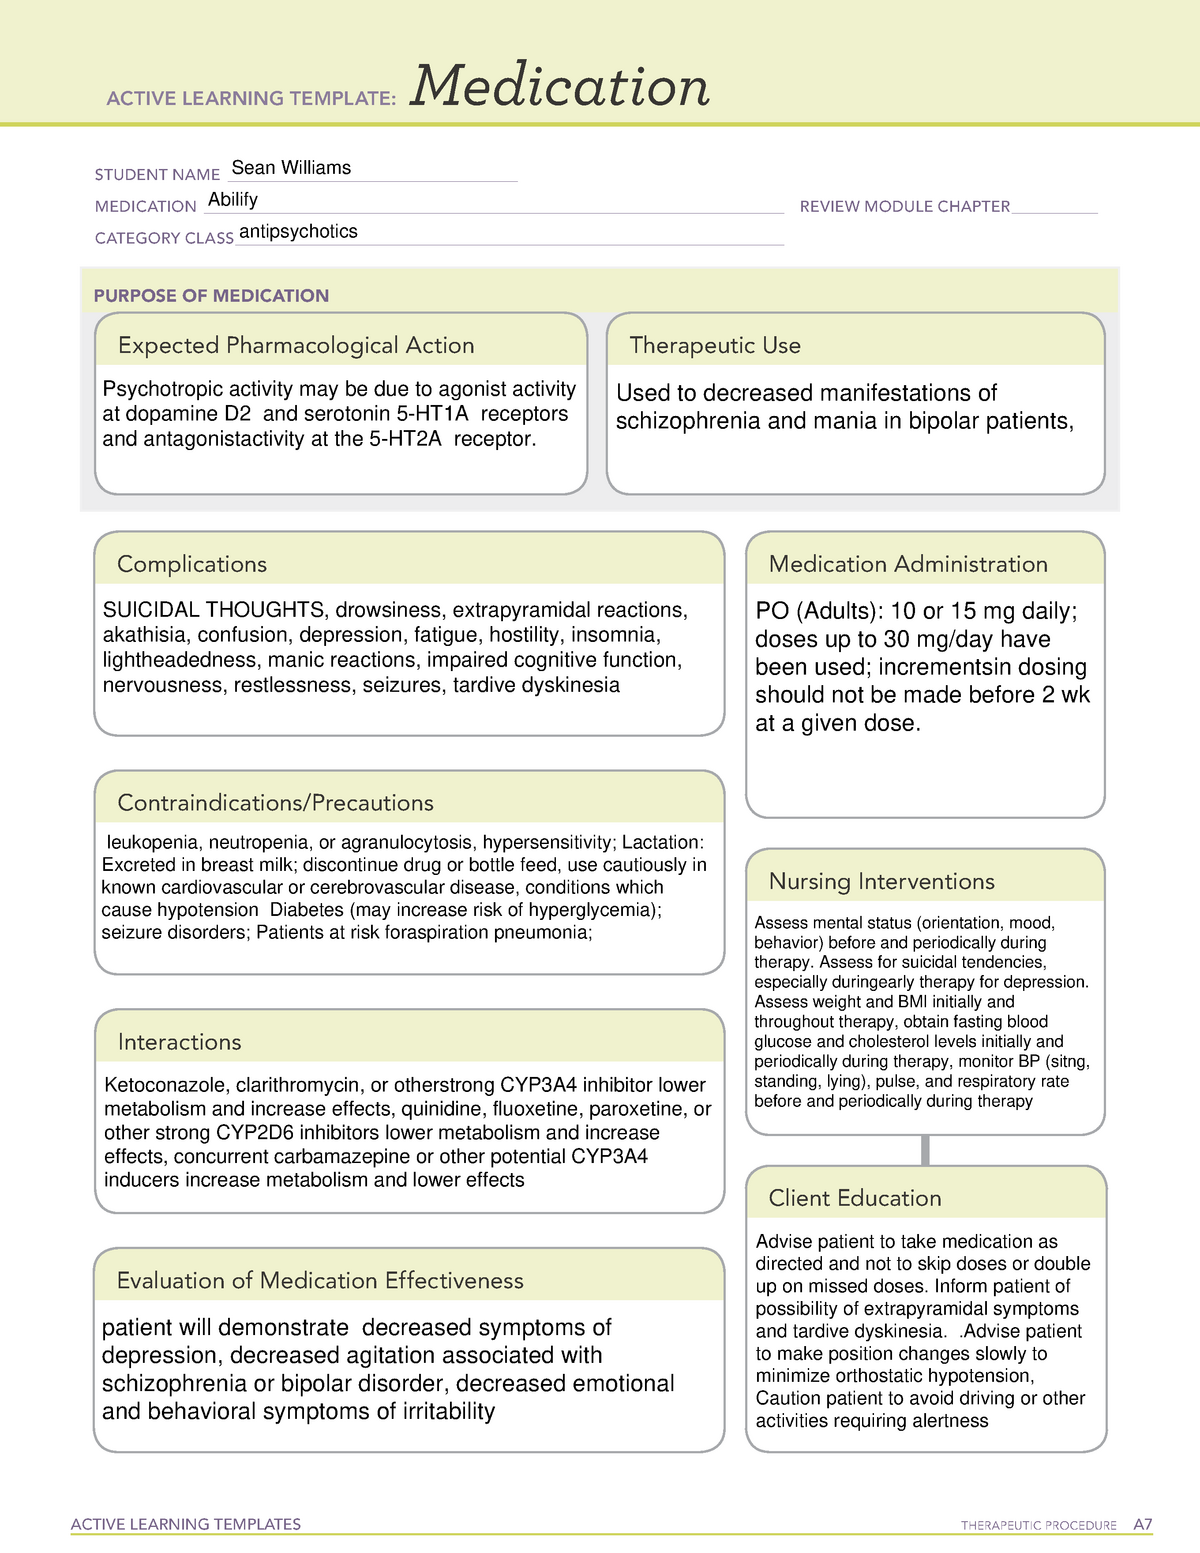 ati-medication-template-abilify-active-learning-templates-therapeutic